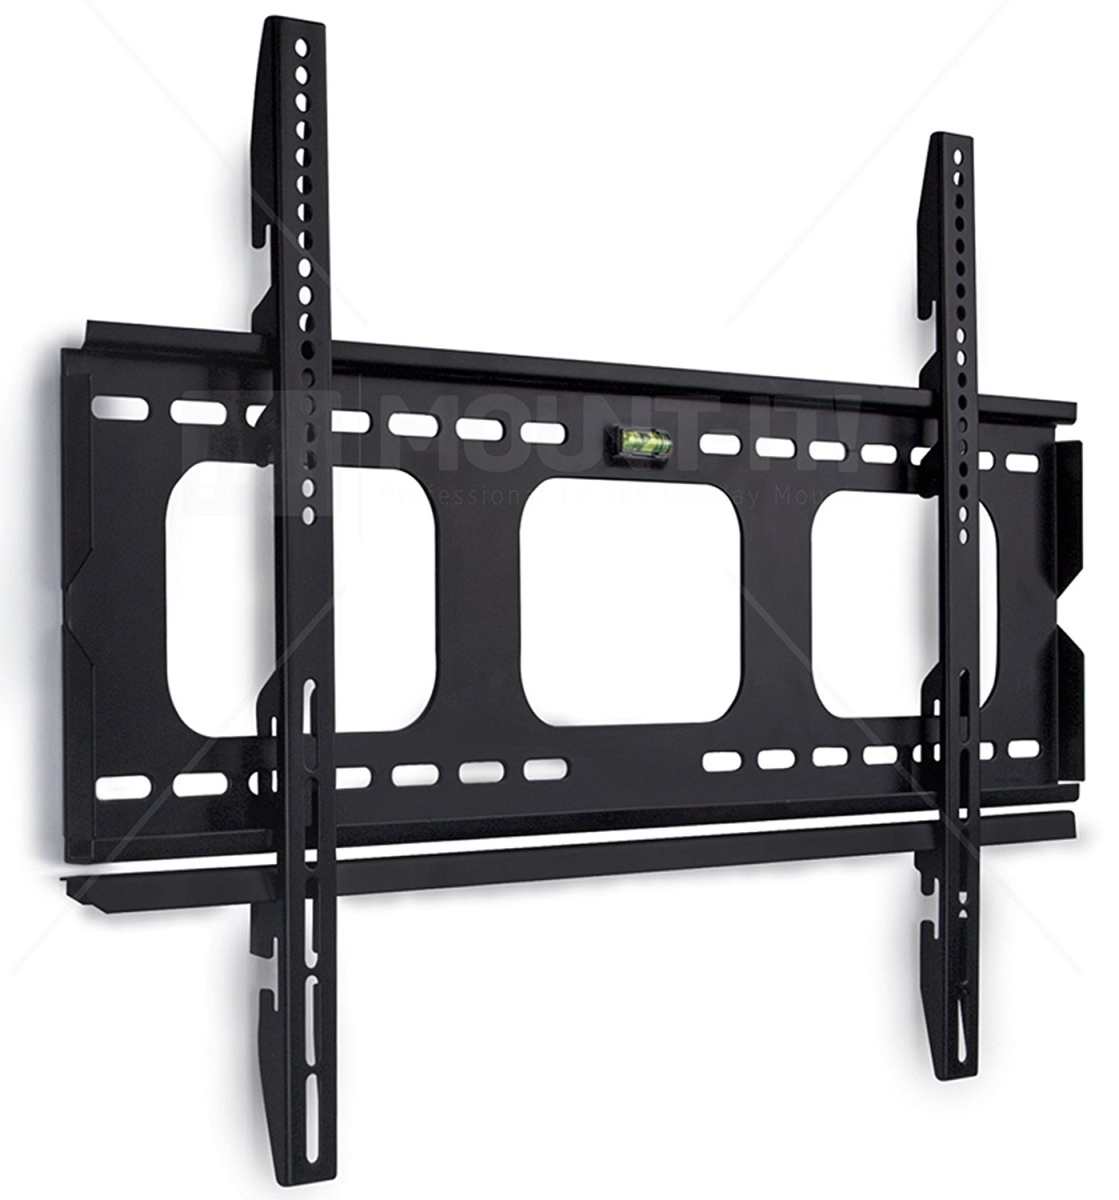 42-70 in. Premium Low-Profile Fixed TV Wall Mount Bracket for LCD LED 4K Flat Screen TVs -  BetterBattery, BE98091